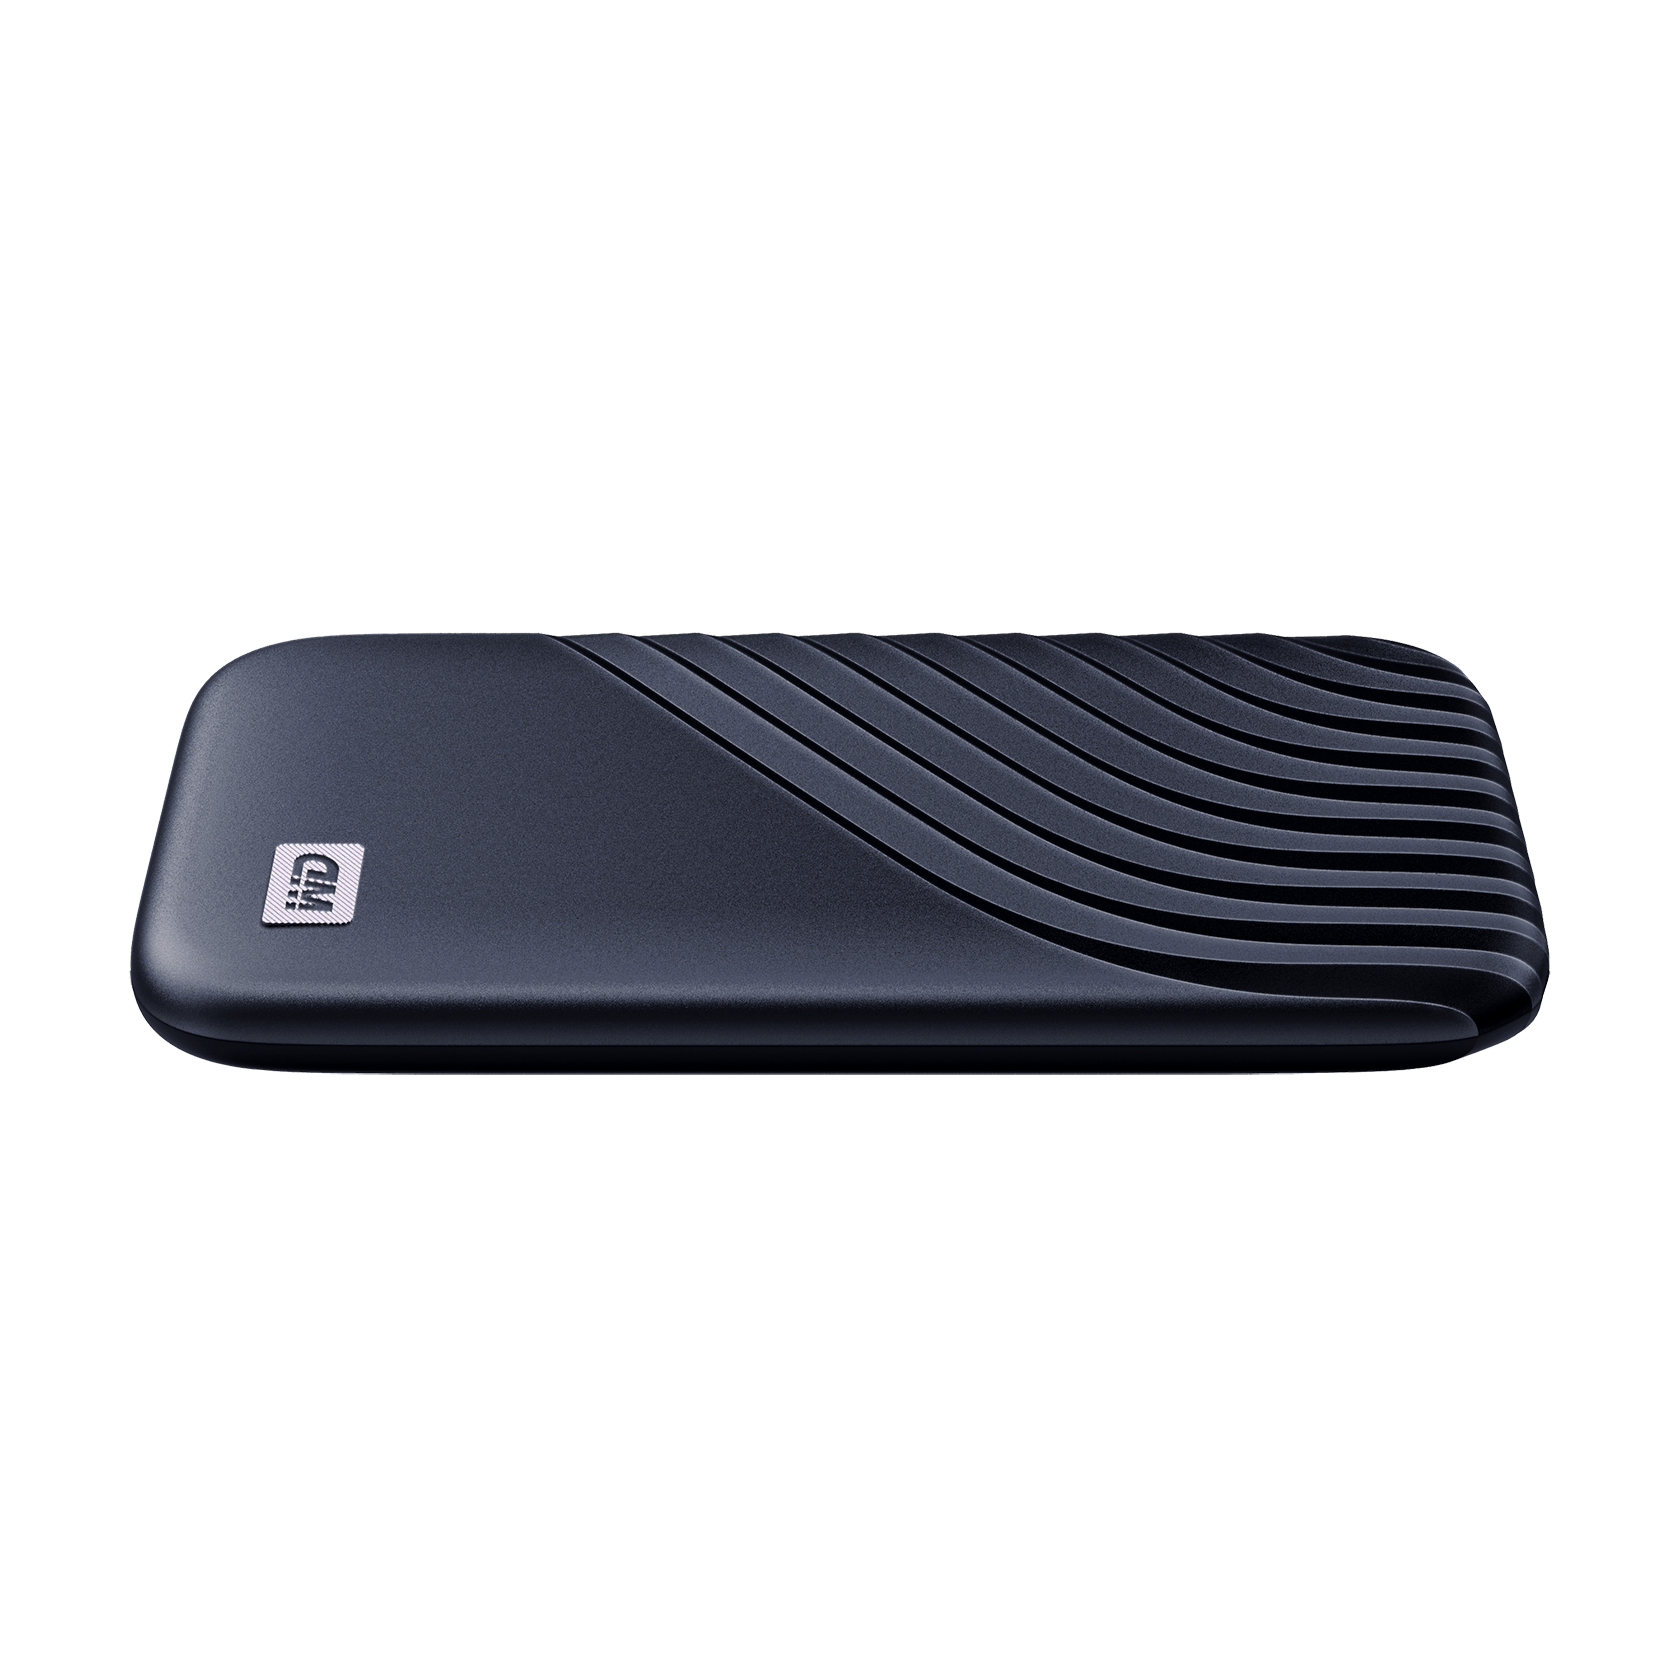 WD 2TB My Passport SSD, Portable External Solid State Drive, Blue - WDBAGF0020BBL-WESN - image 5 of 8